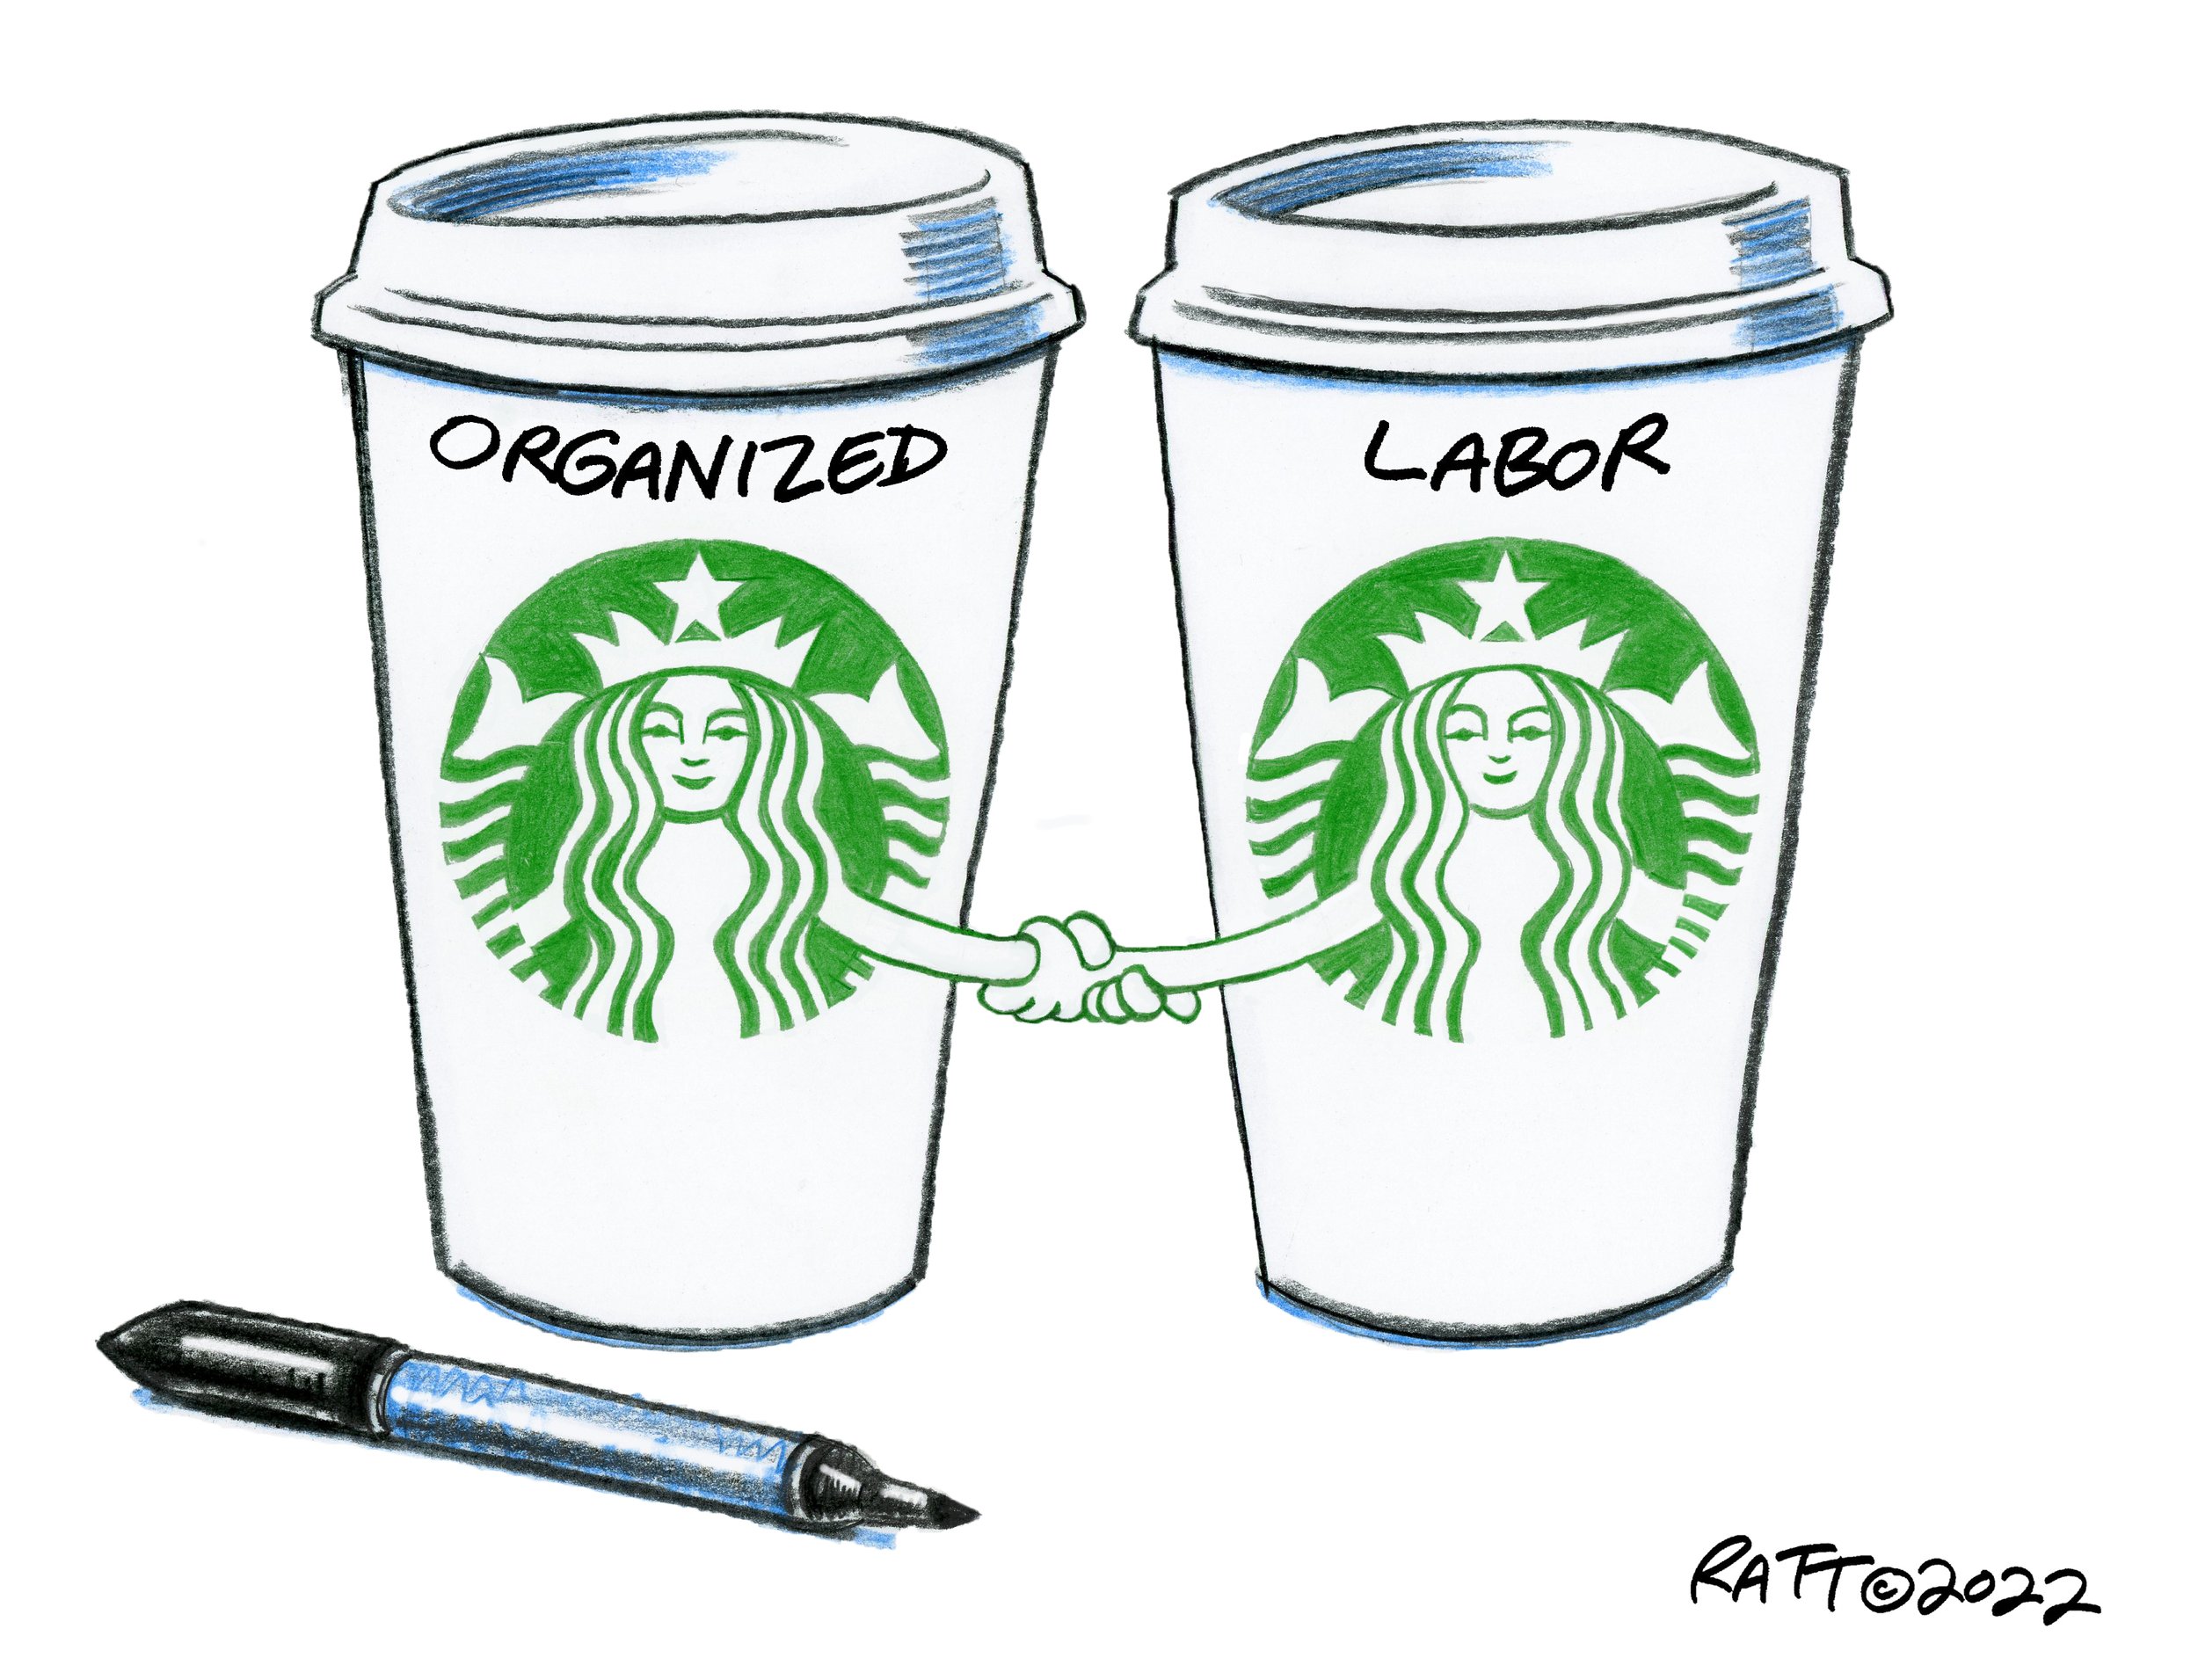 "Tall" alone, "venti" together.  (Crooks And Liars, Sept. 11, 2022; republished in The Nation on Sept. 22, 2022.)